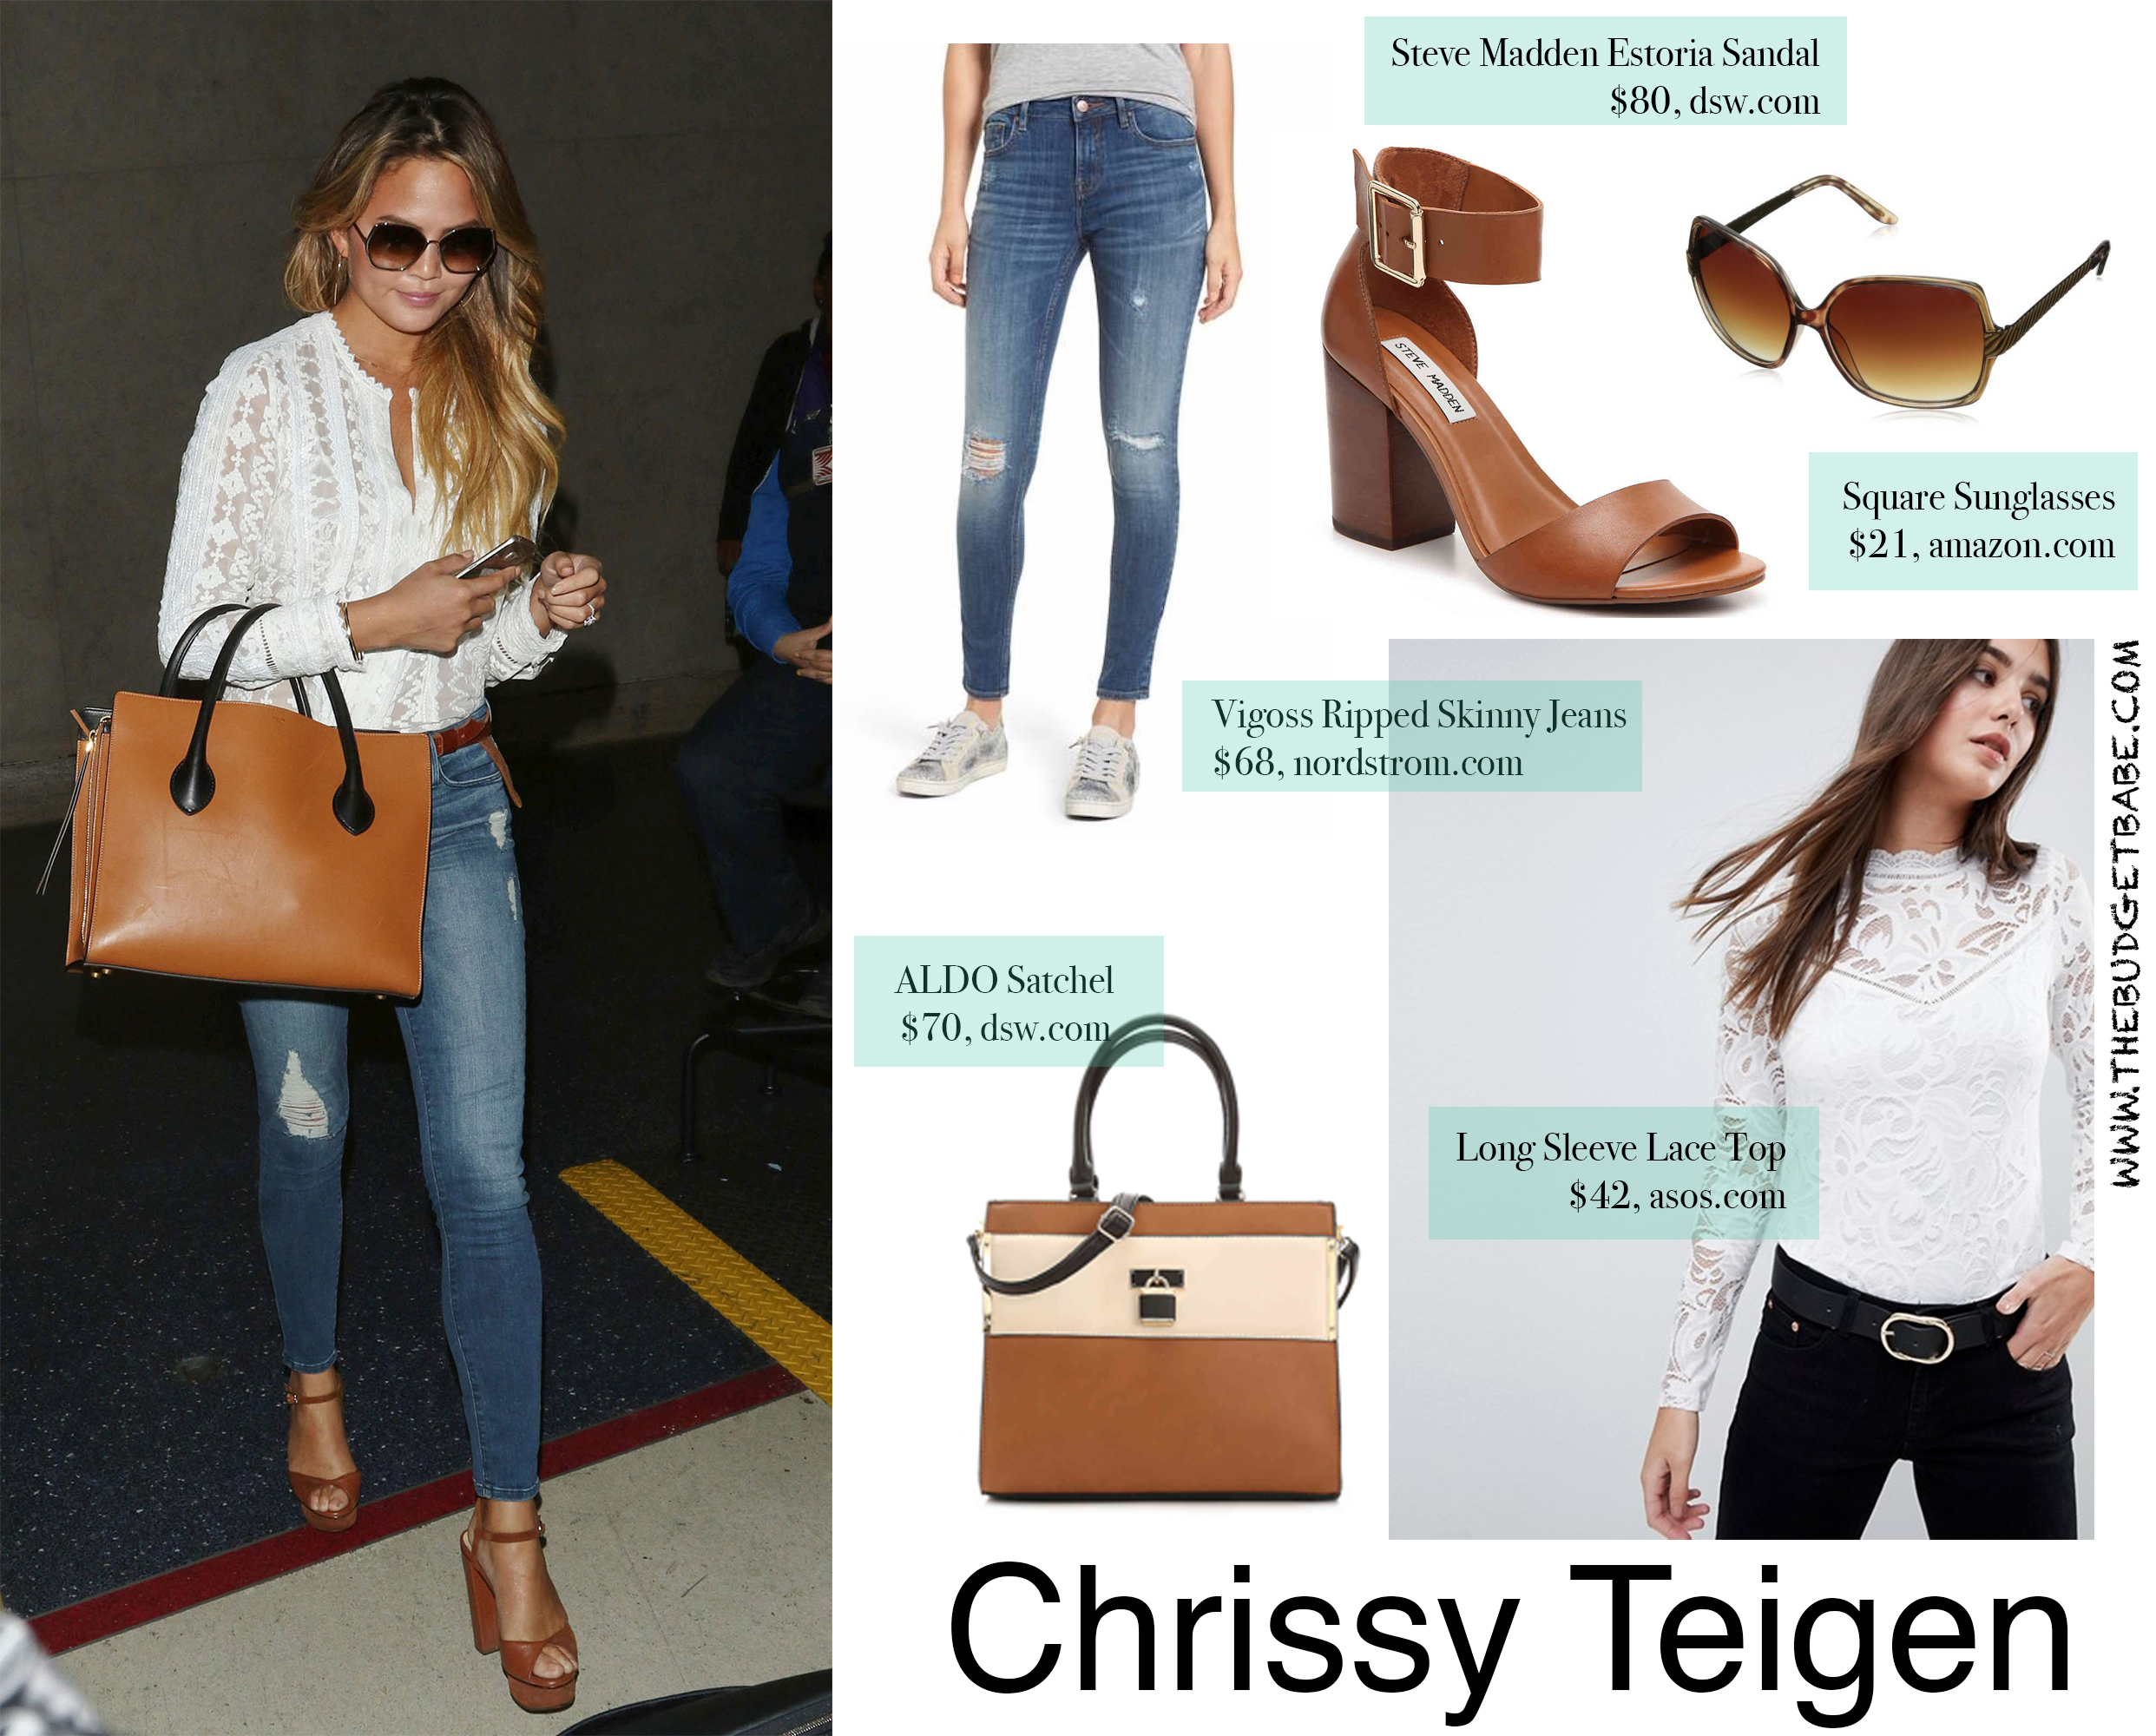 Chrissy Teigen look for less - white blouse skinny jeans and cognac heel sandals